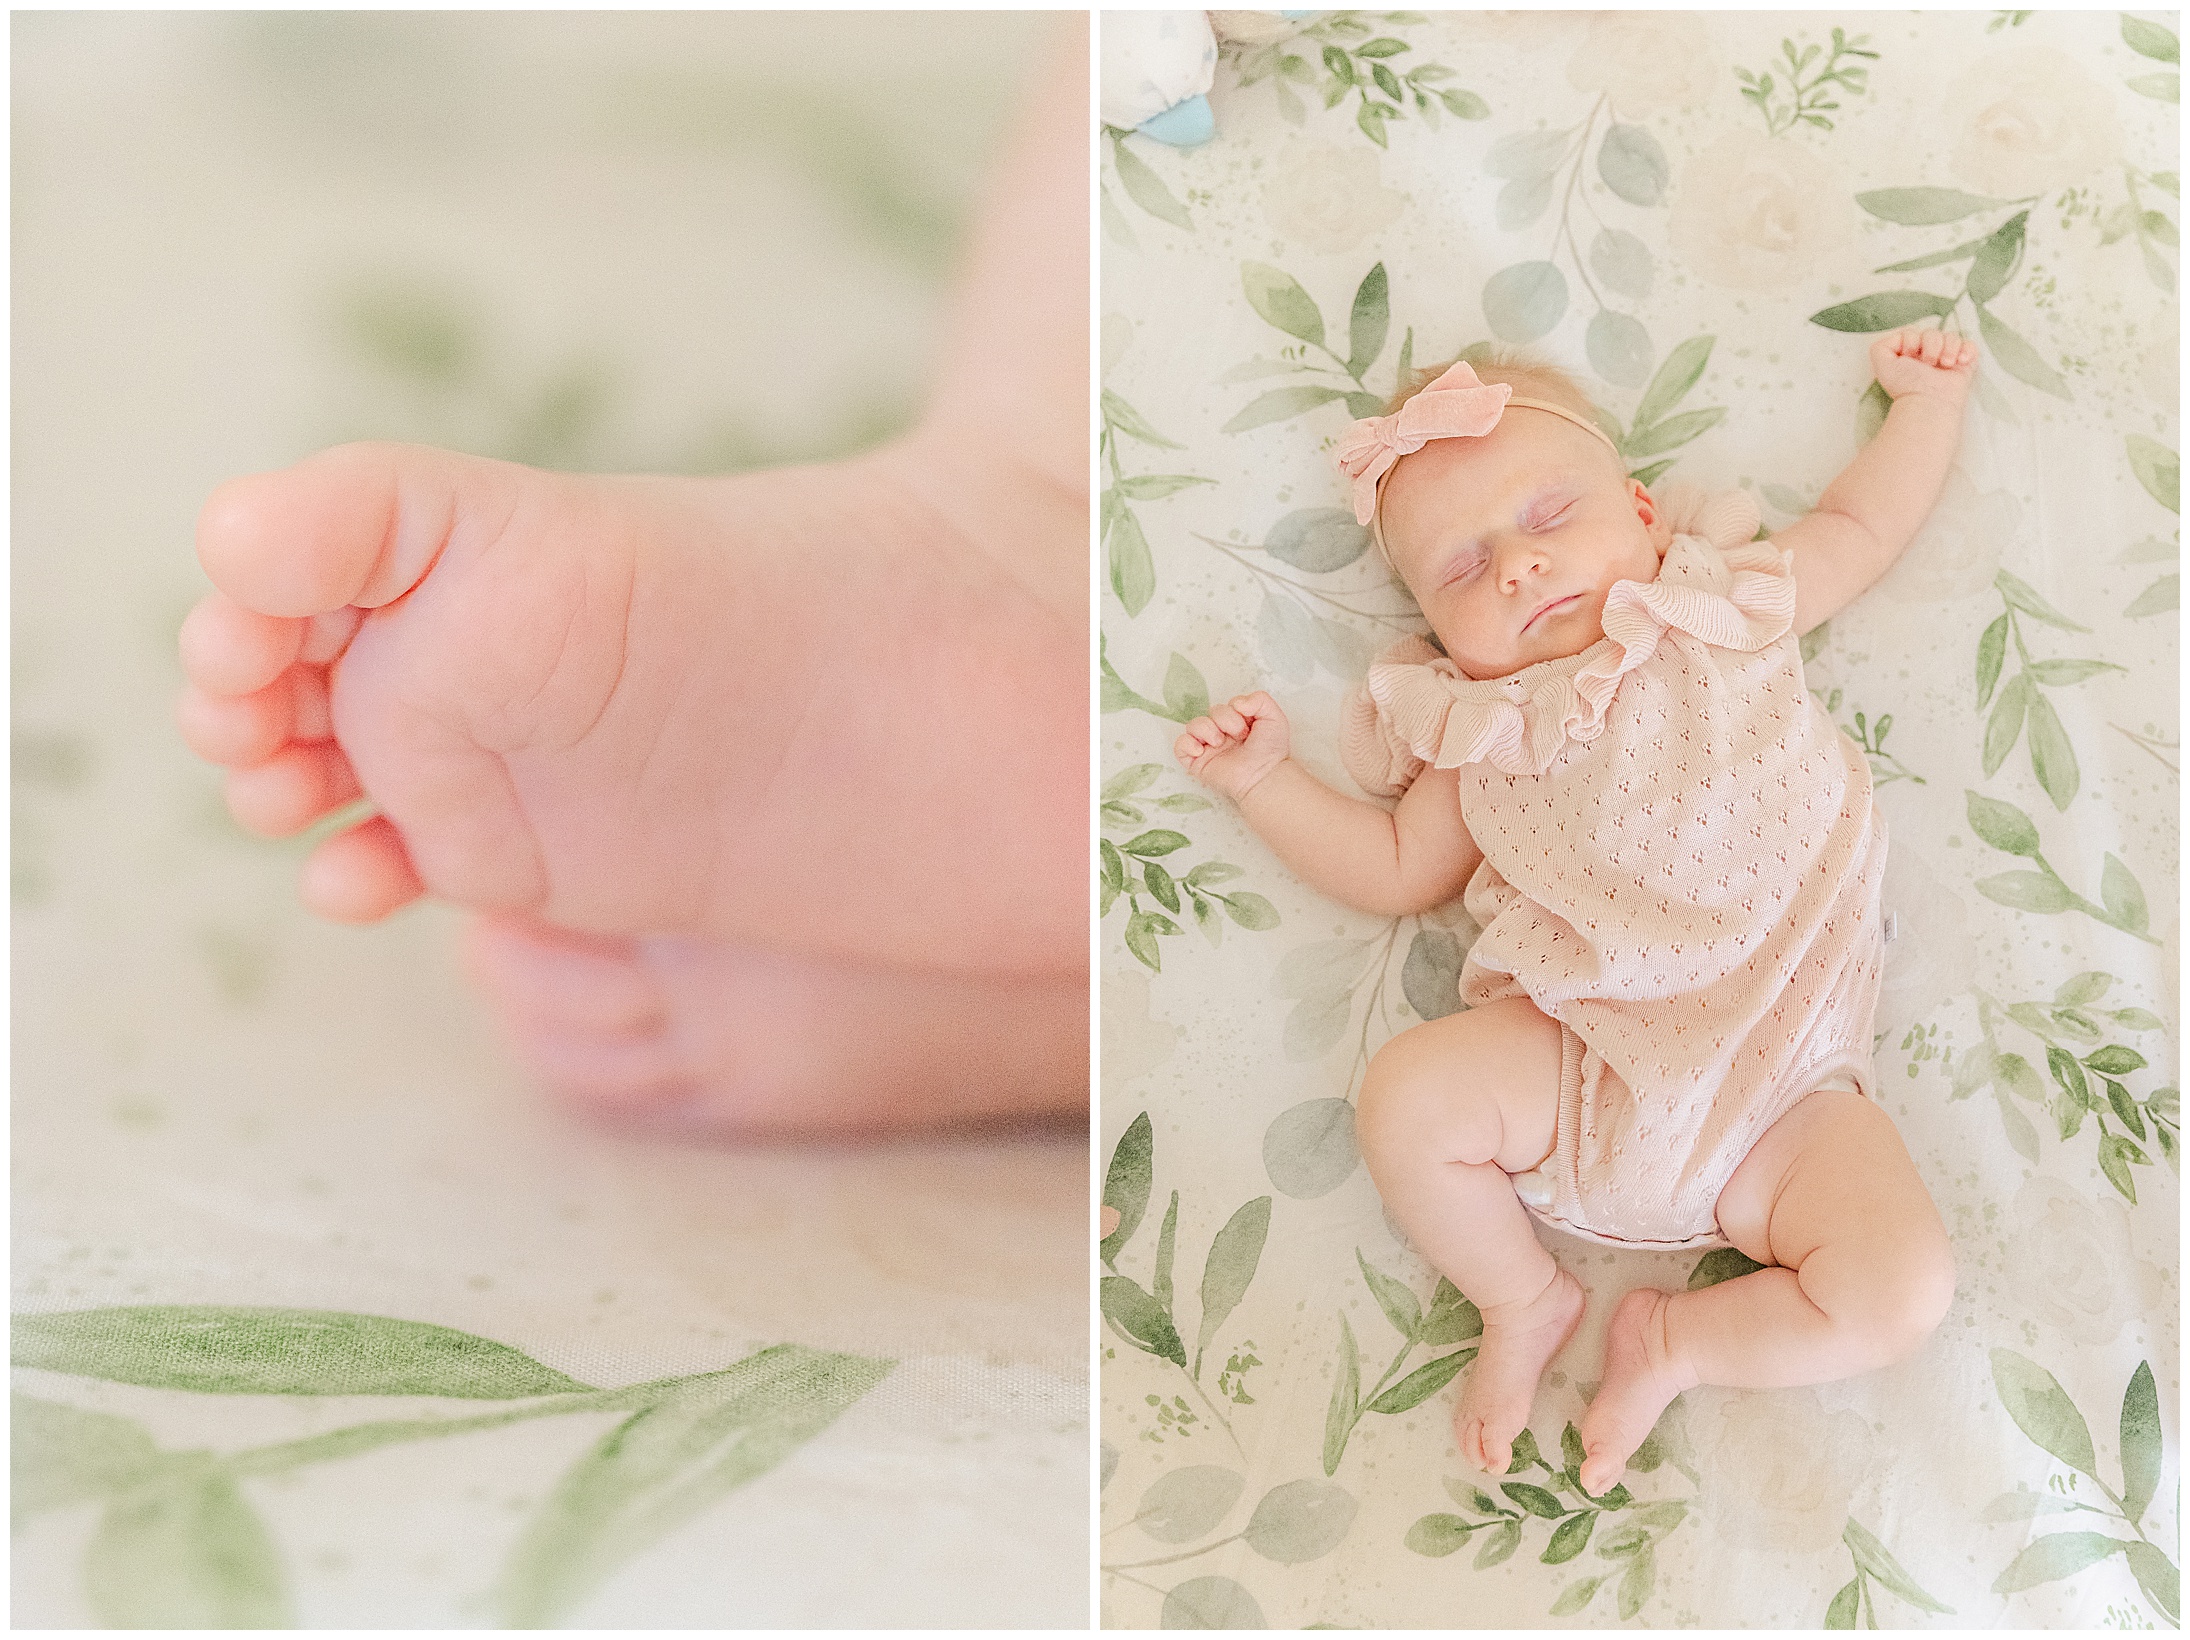 Newborn In Home Lifestyle Session Willows CA Sisters Pink,